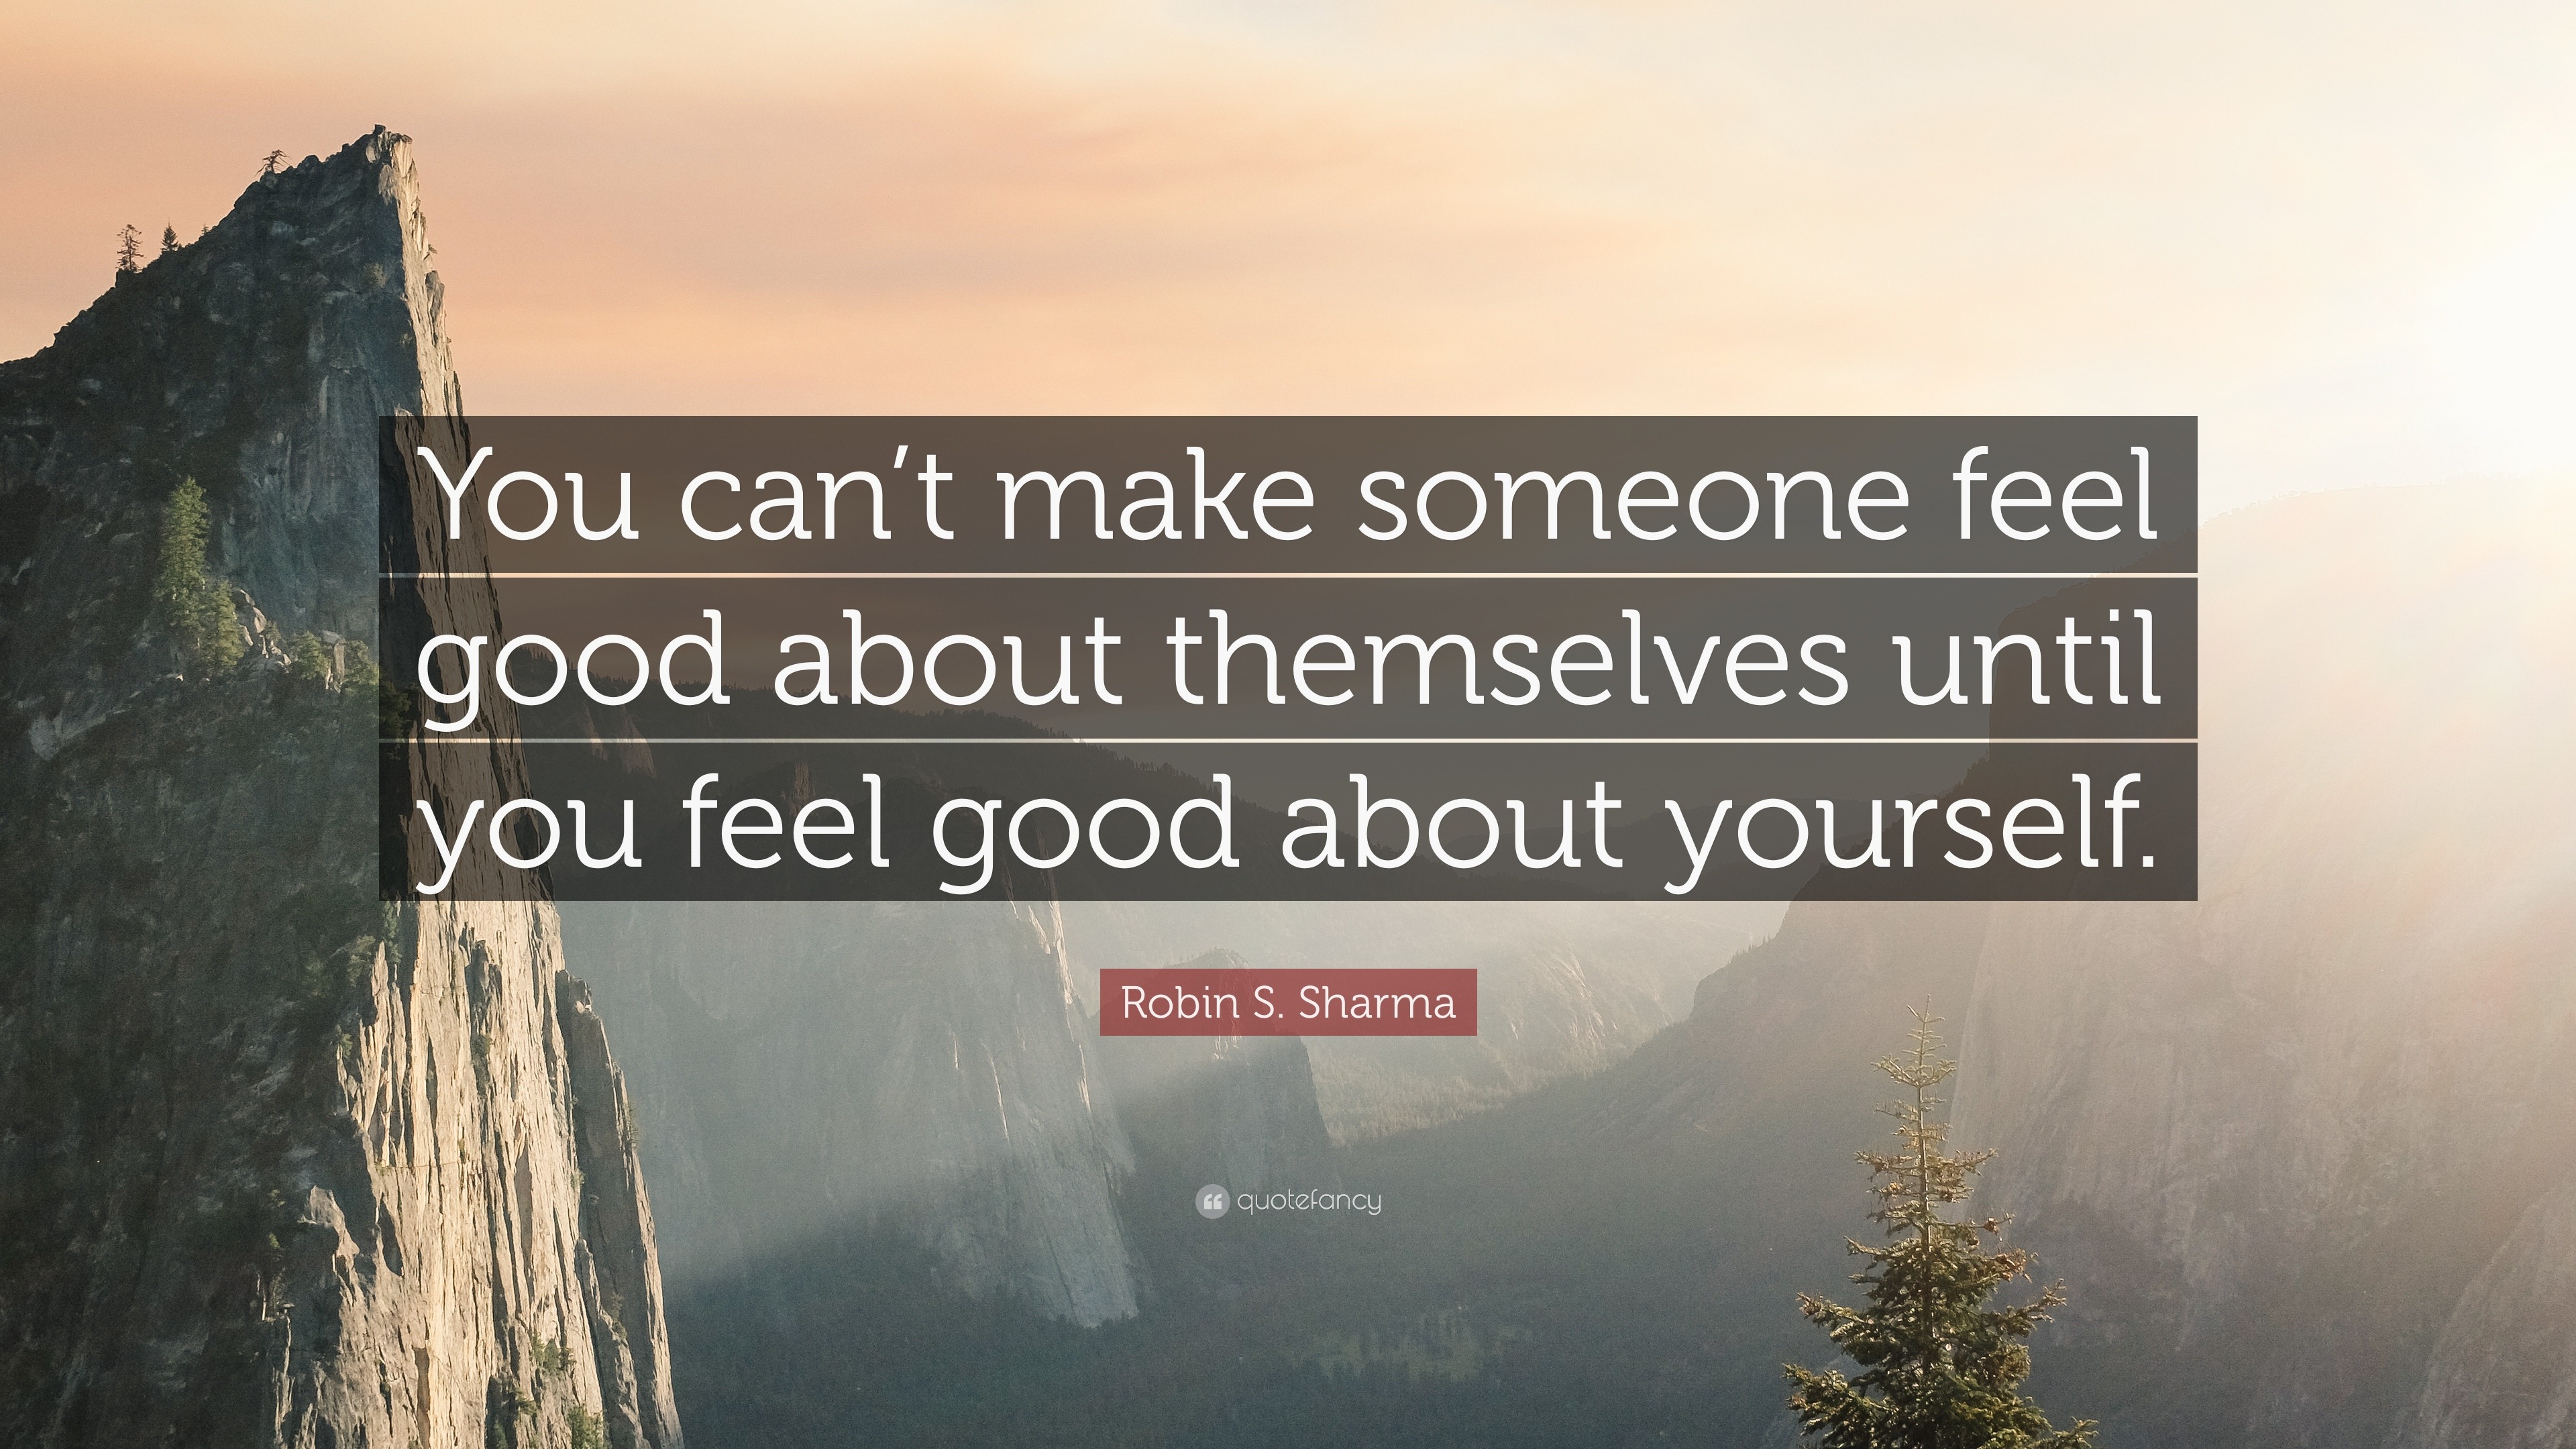 12708 Robin S Sharma Quote You can t make someone feel good about